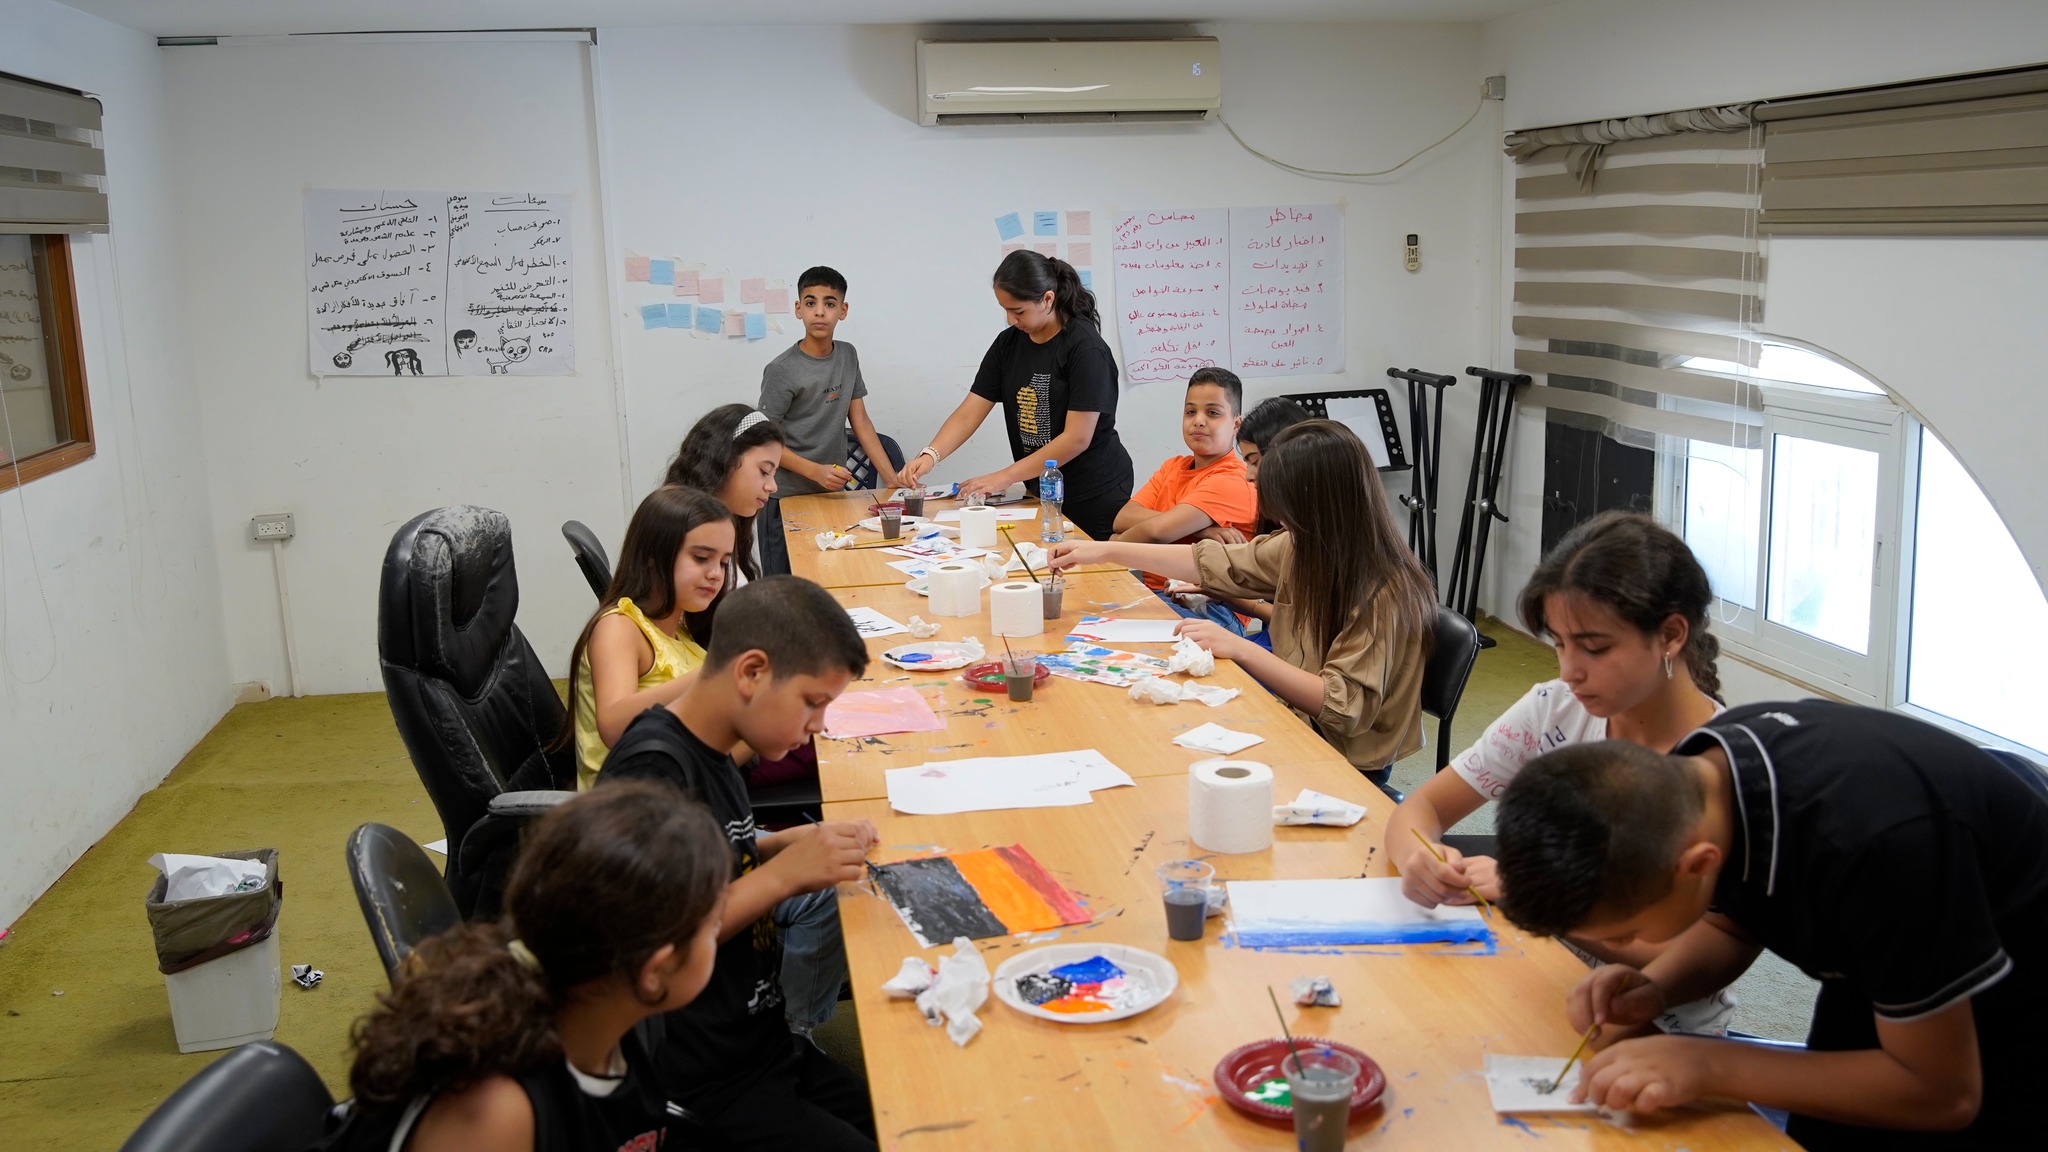 The activities of Shoruq  Art Summer camp have started with the participation of 100 children